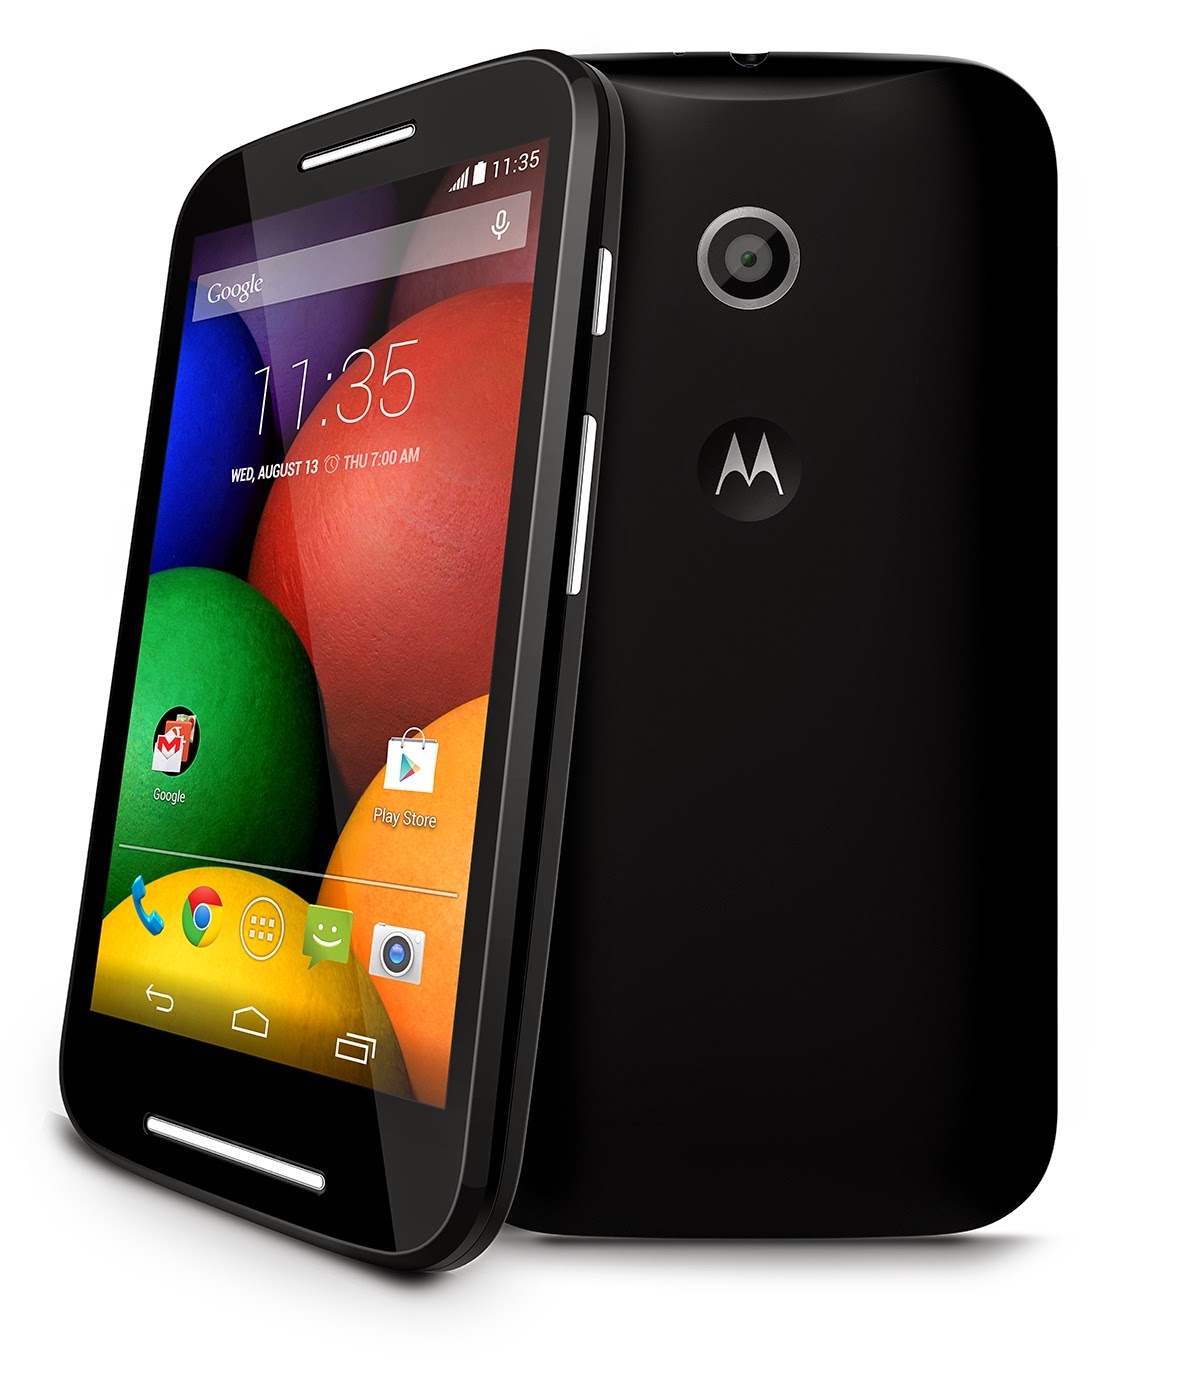 Introducing Moto E and Moto G with 4G LTE: Smart phones priced for all